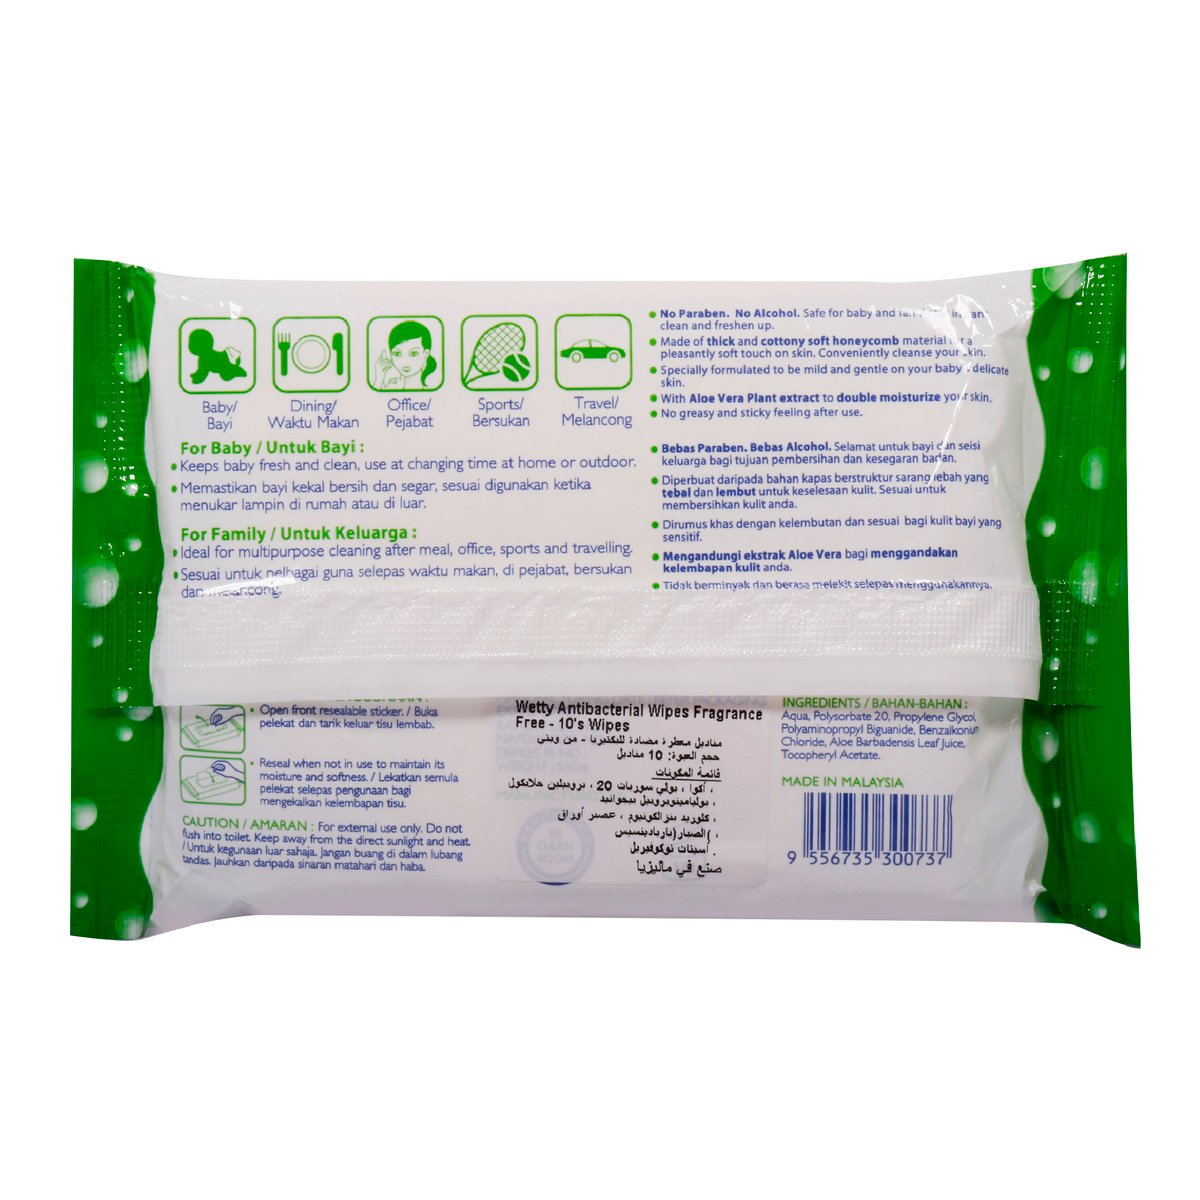 Wetty Anti-Bacterial Wipes Fragrance Free 10pcs